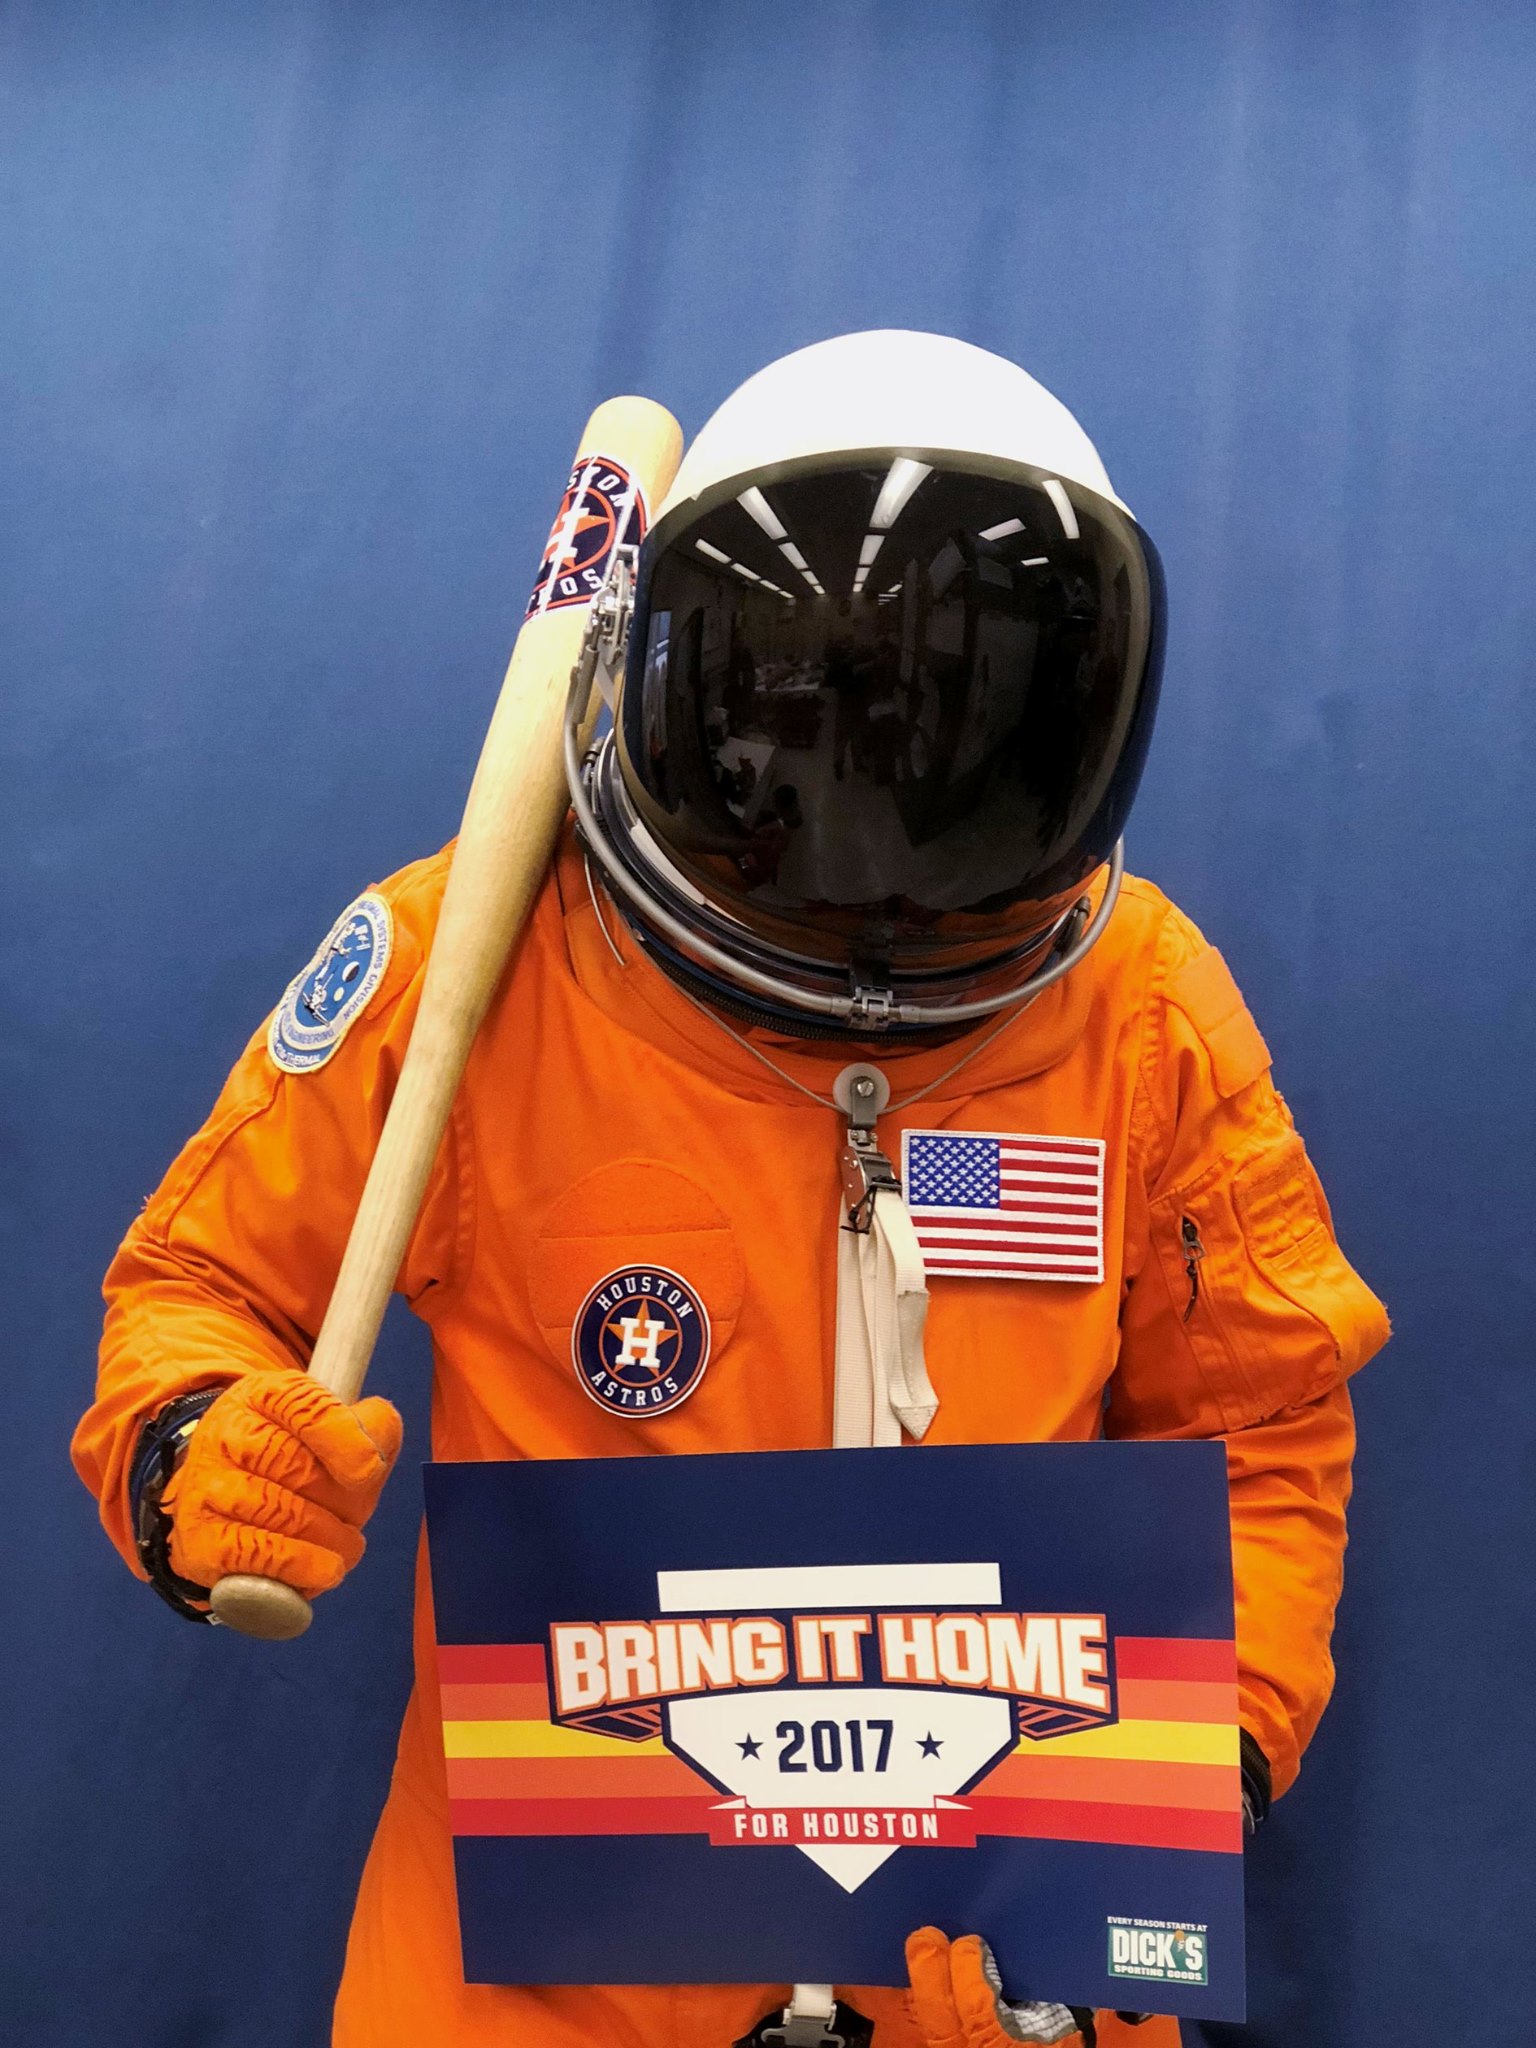 PHOTOS: 'This is Space City': New Houston Astros uniforms pay tribute to  city's contributions to space travel